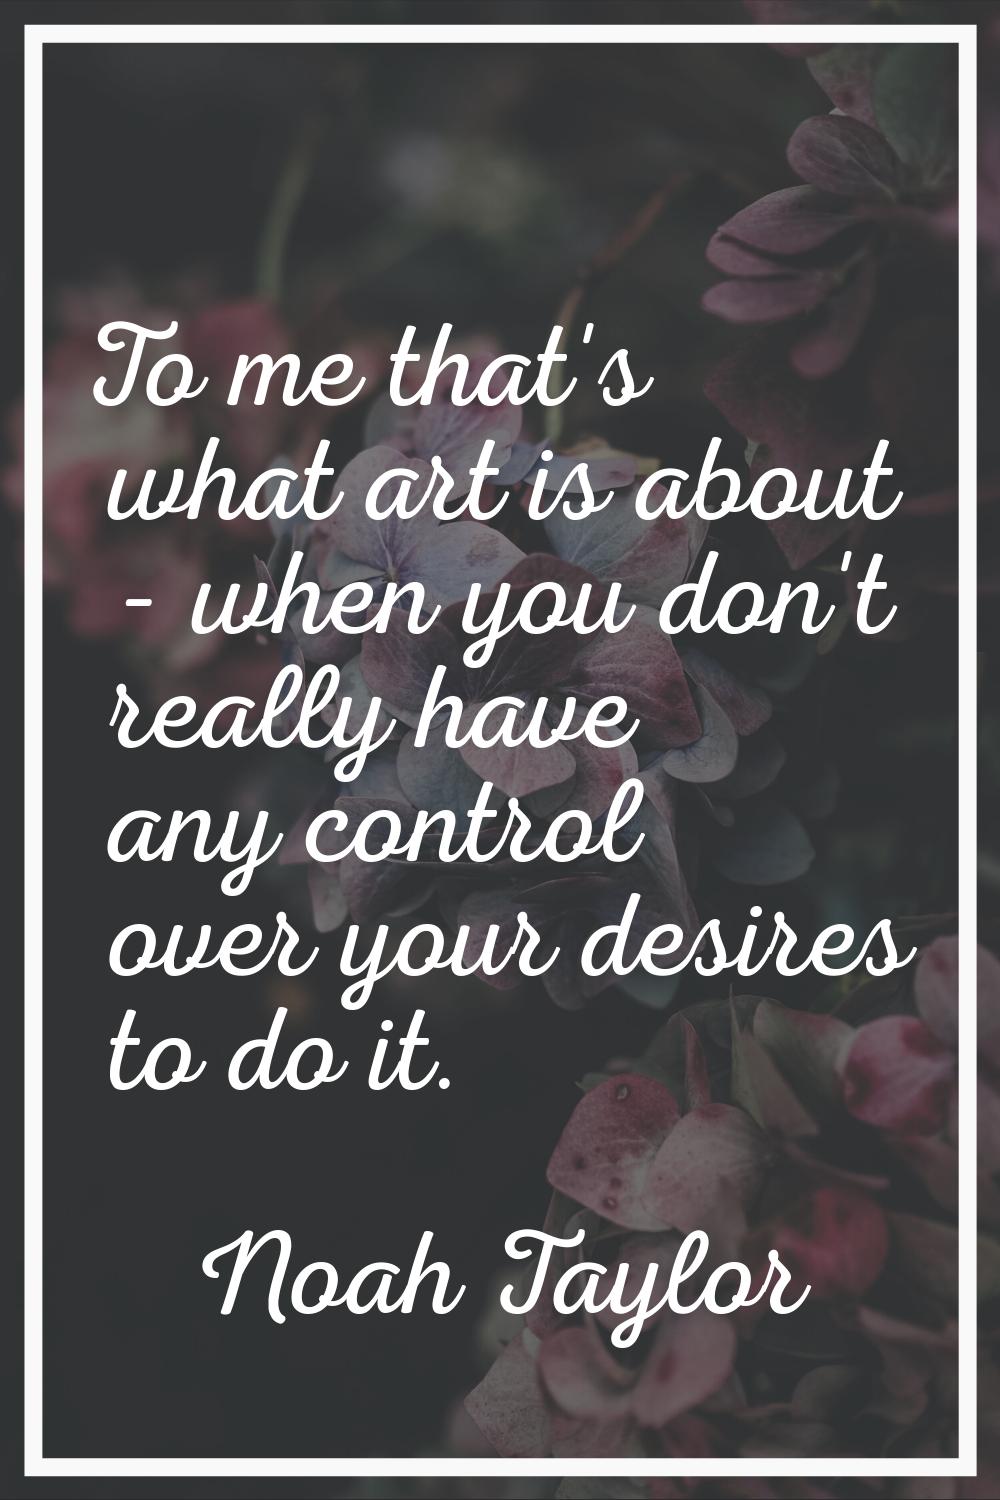 To me that's what art is about - when you don't really have any control over your desires to do it.